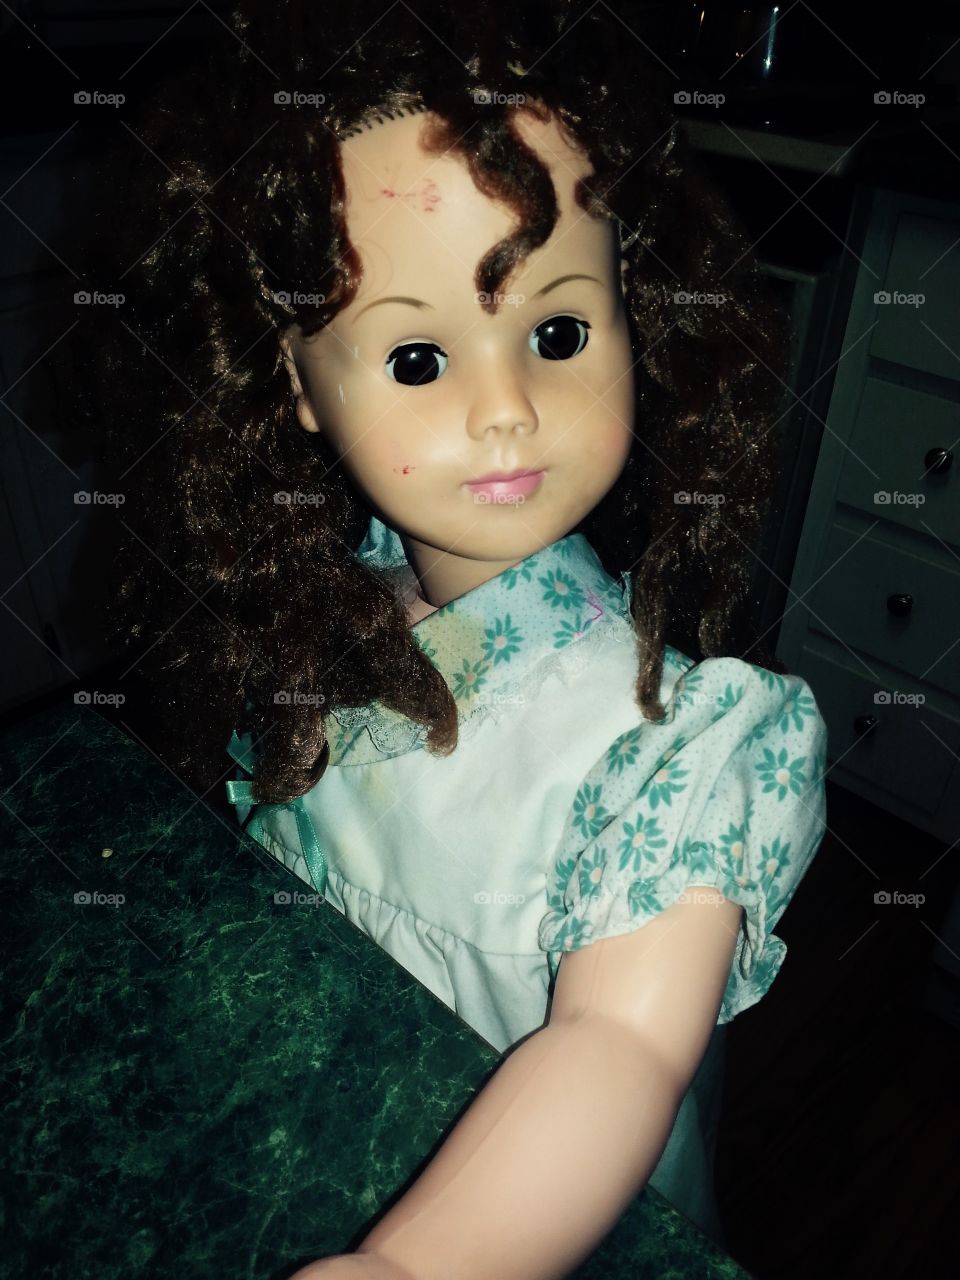 Big four foot old doll.